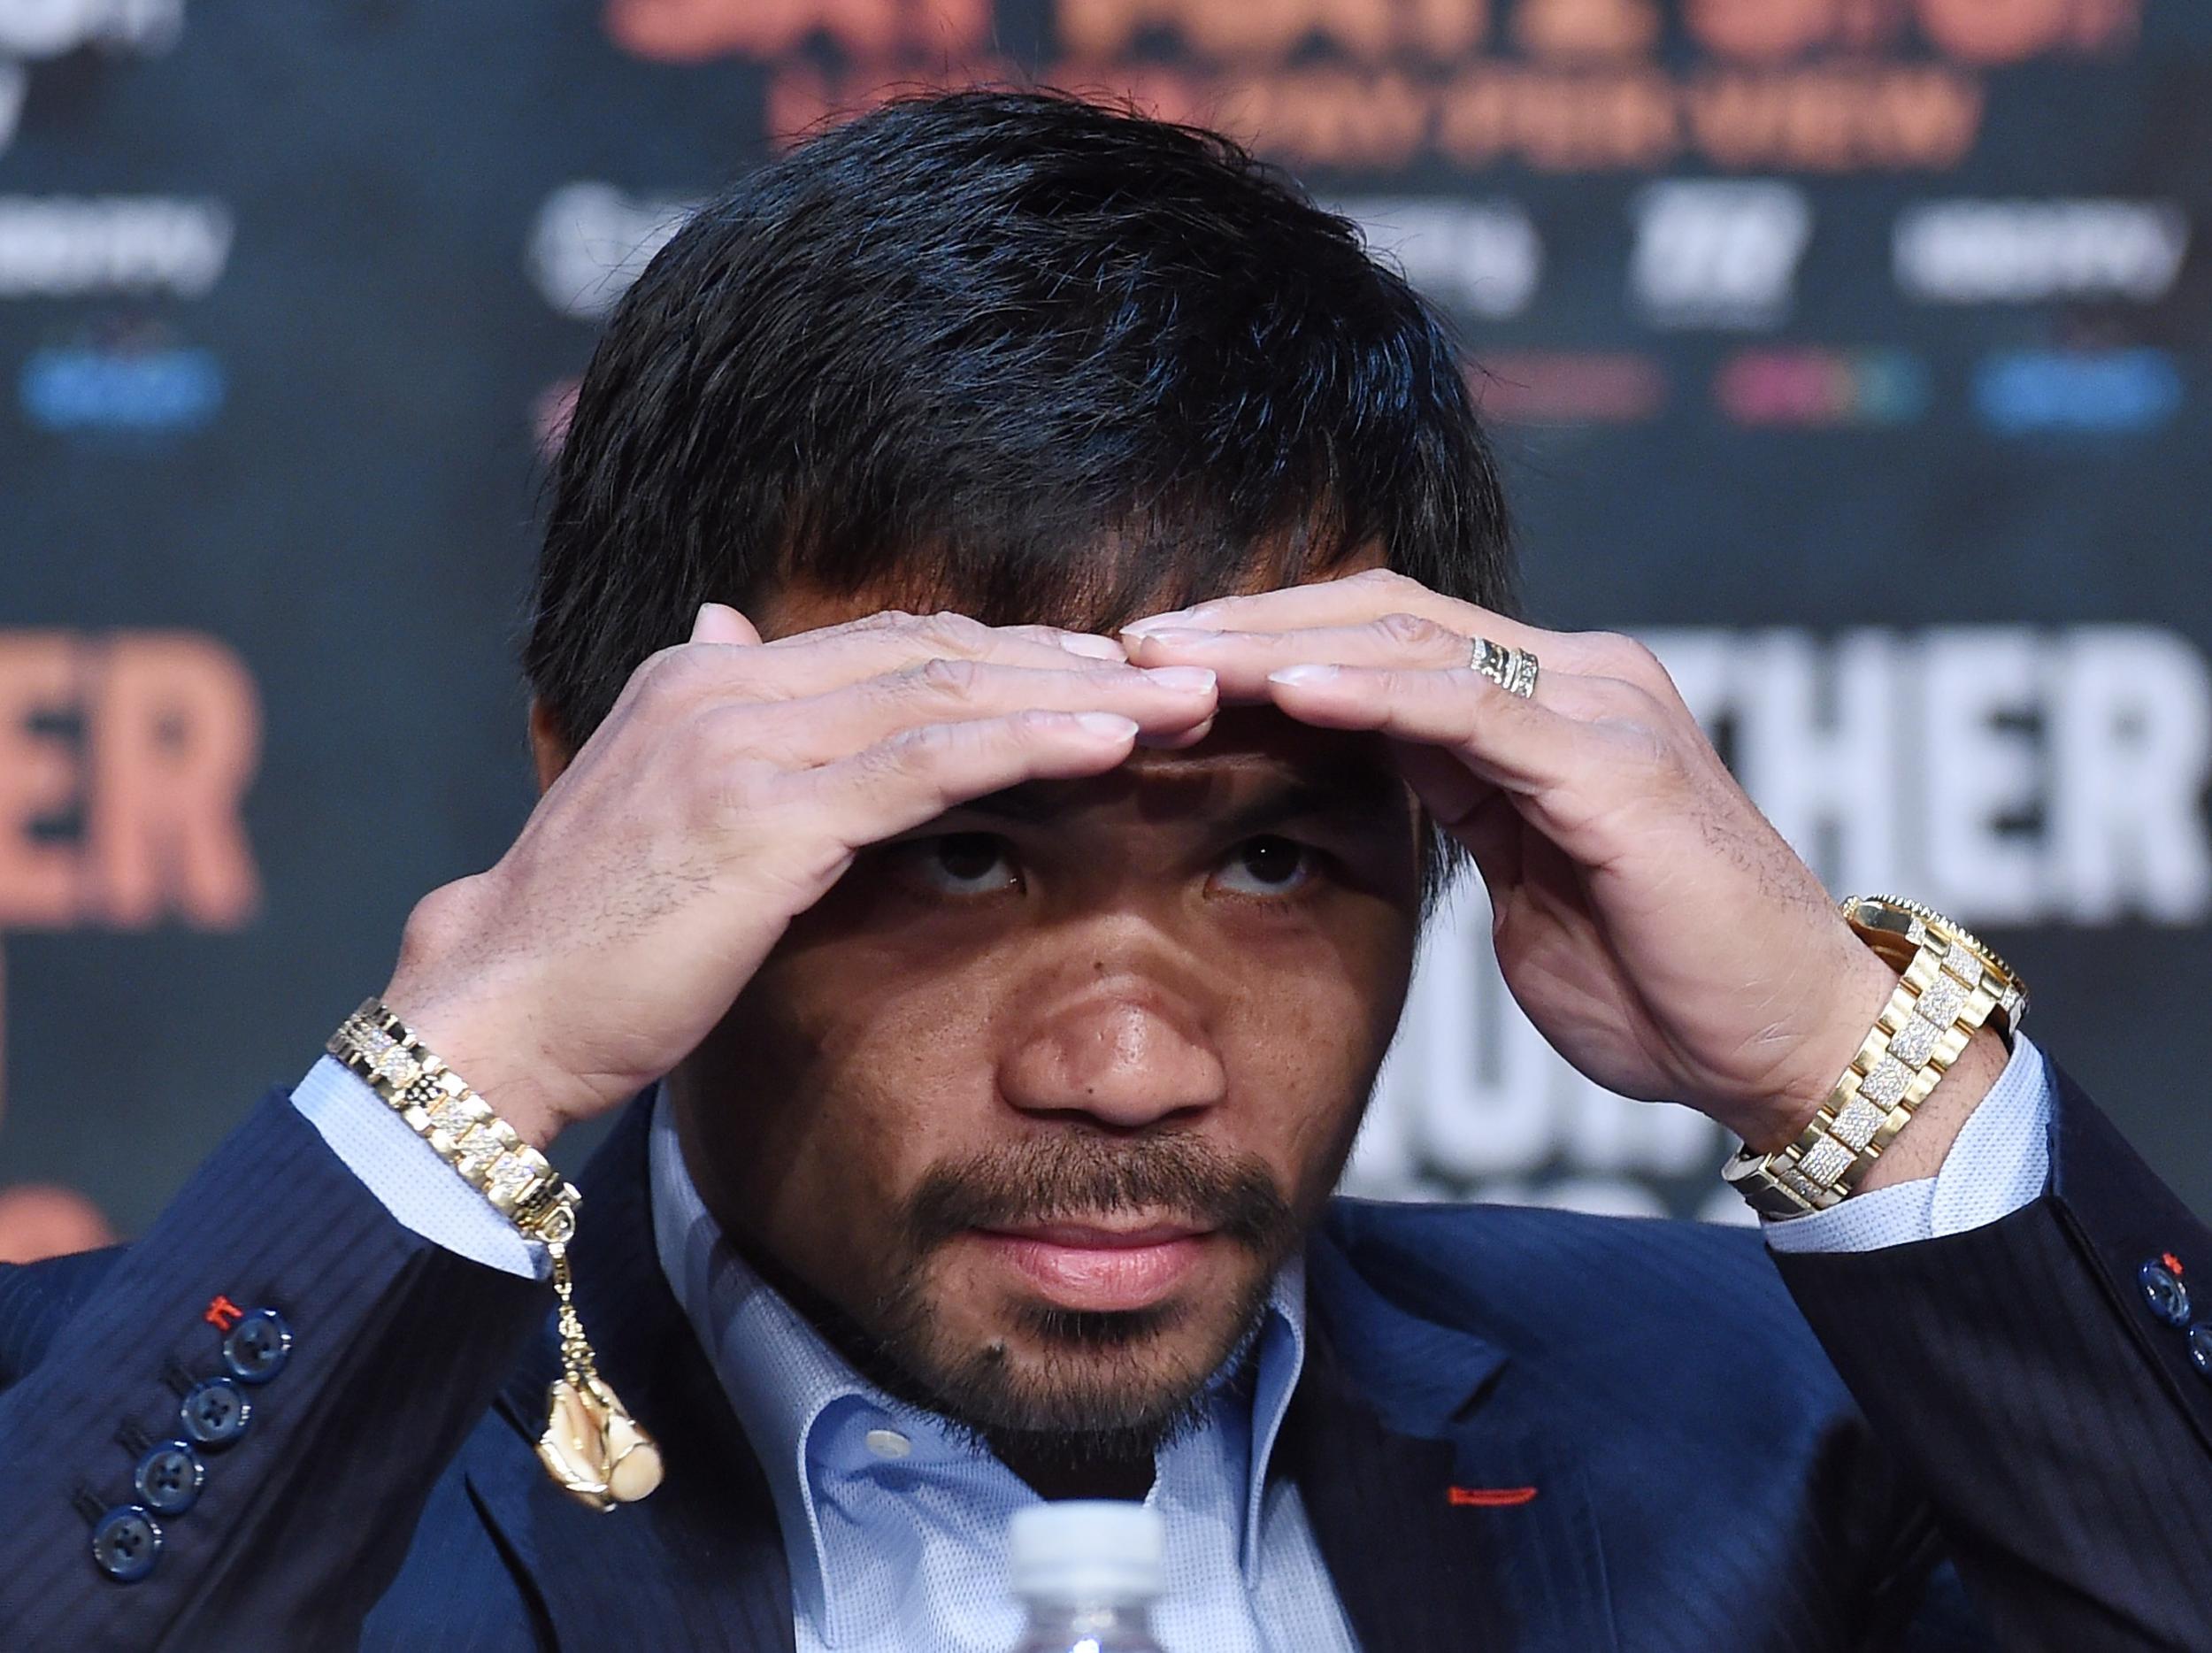 Pacquiao hopes to avenge his previous loss to Mayweather